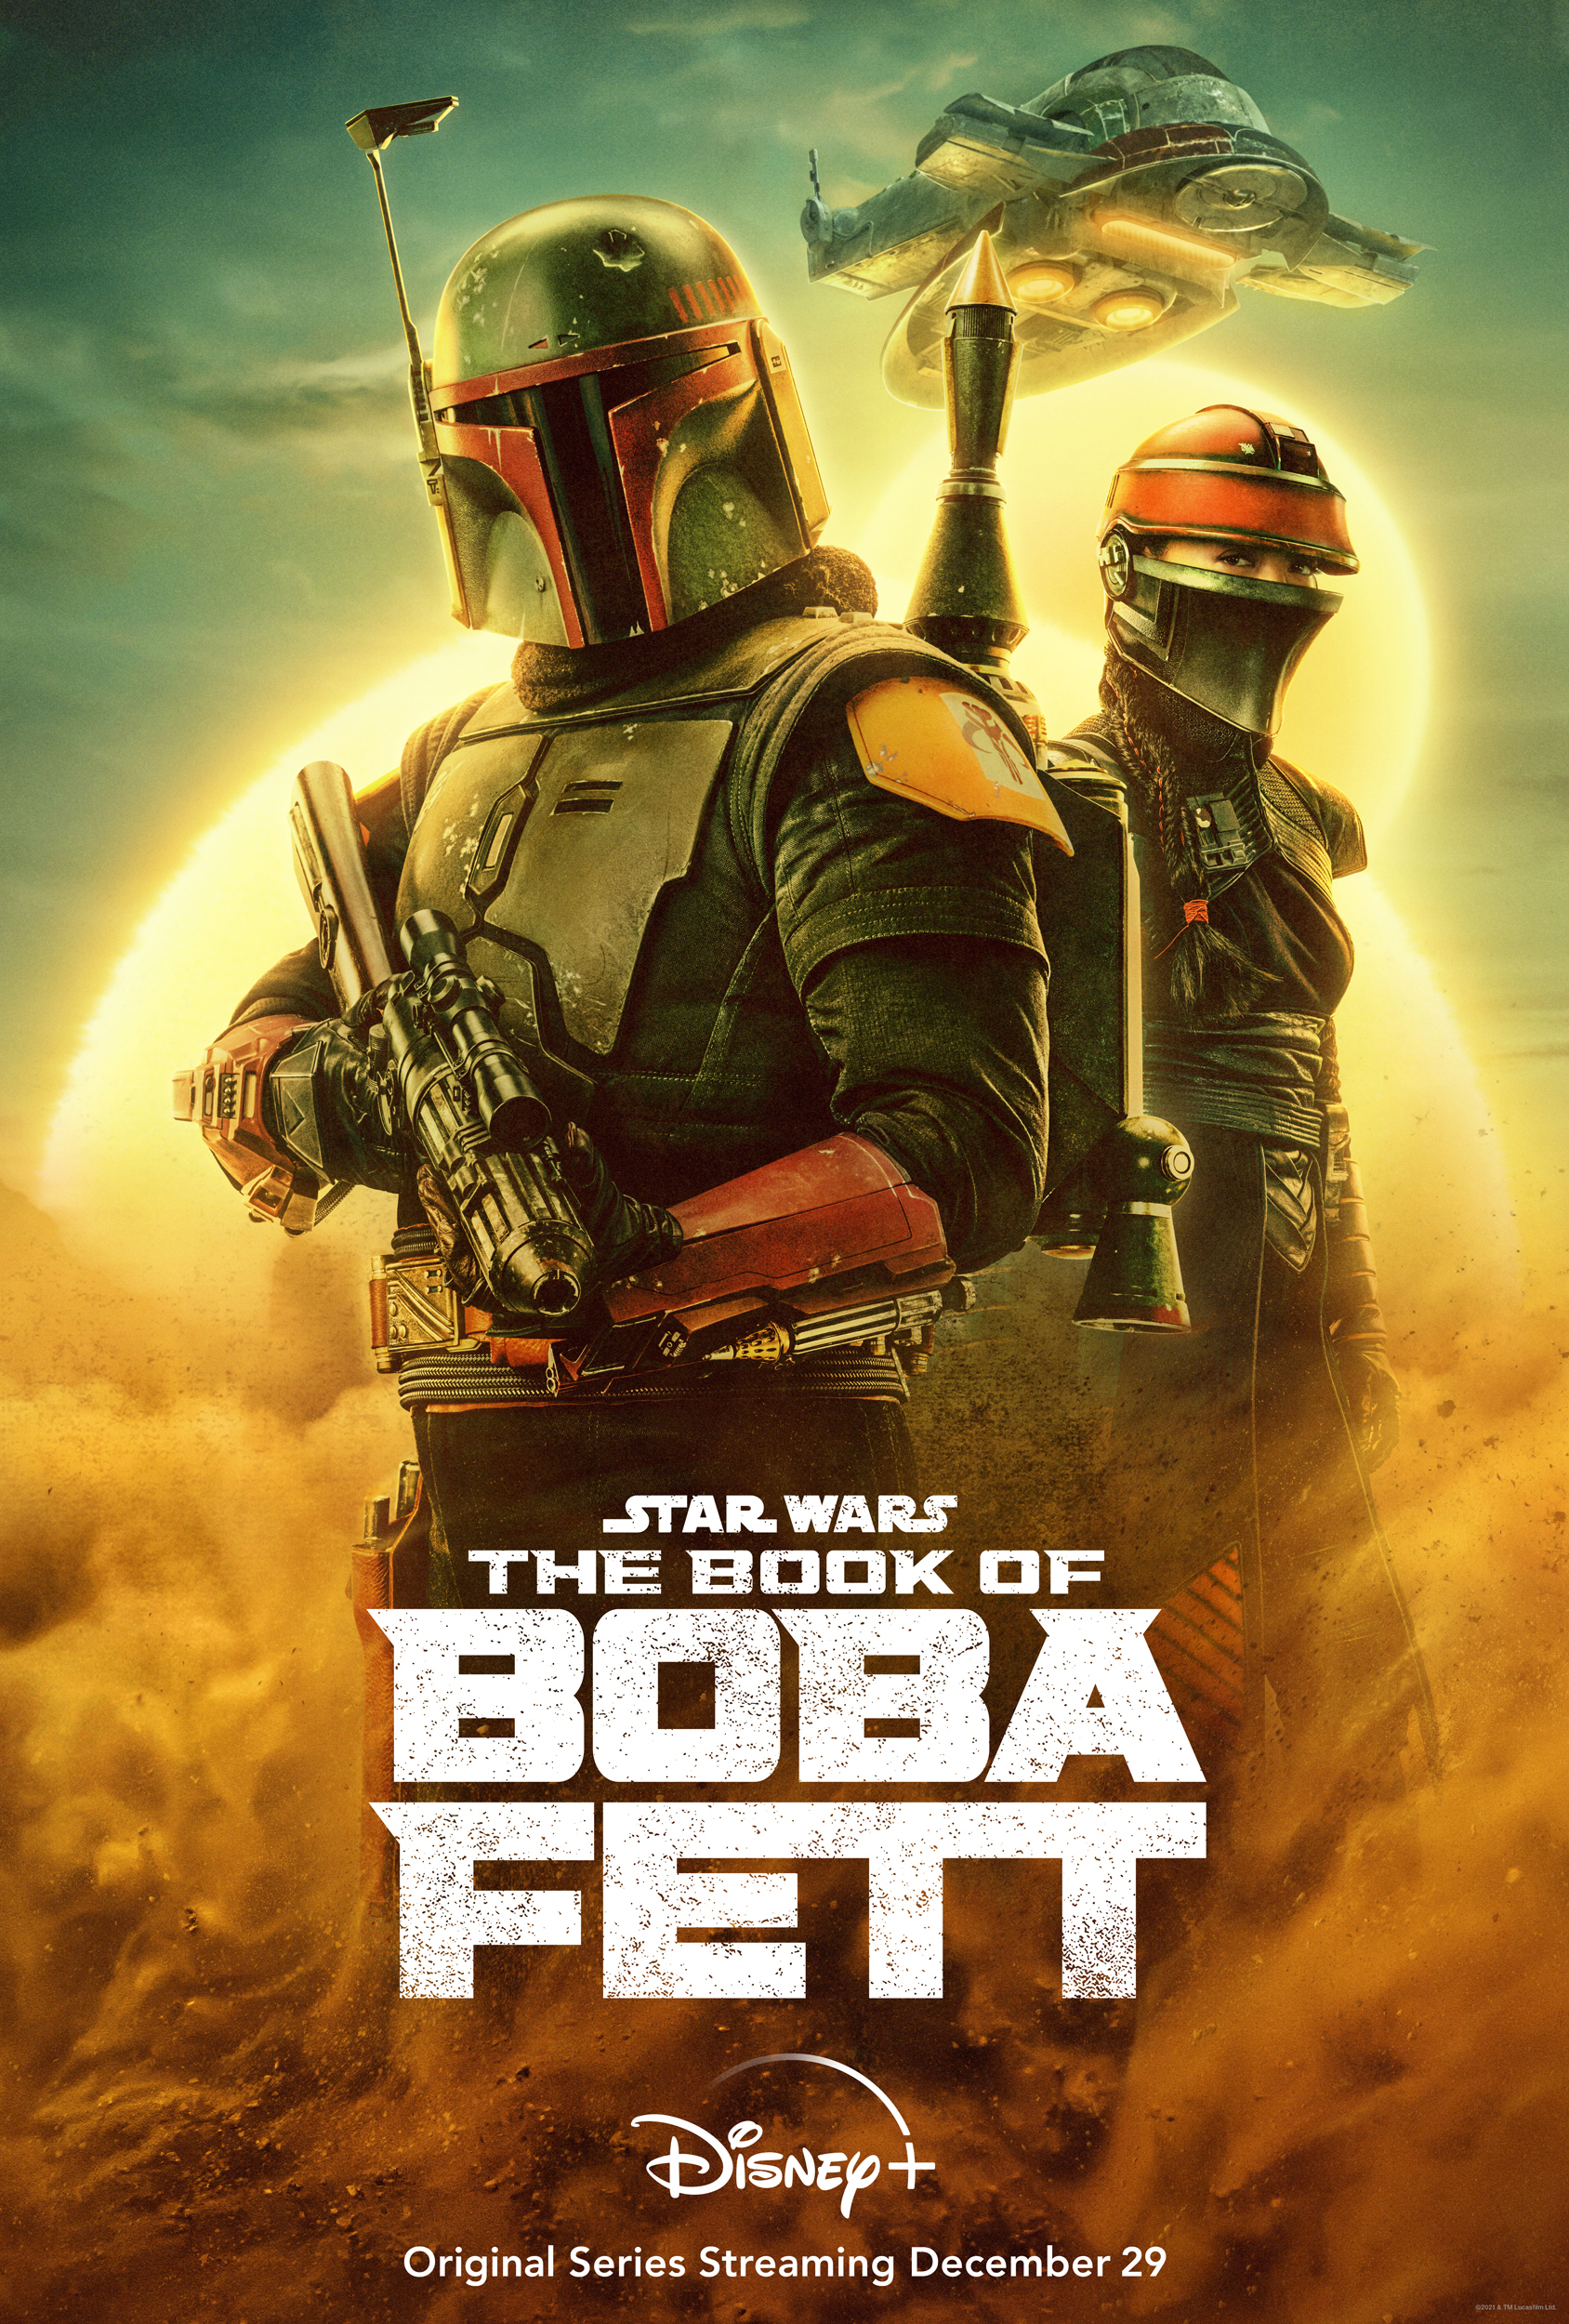 Where to watch The Book of Boba Fett Season 1